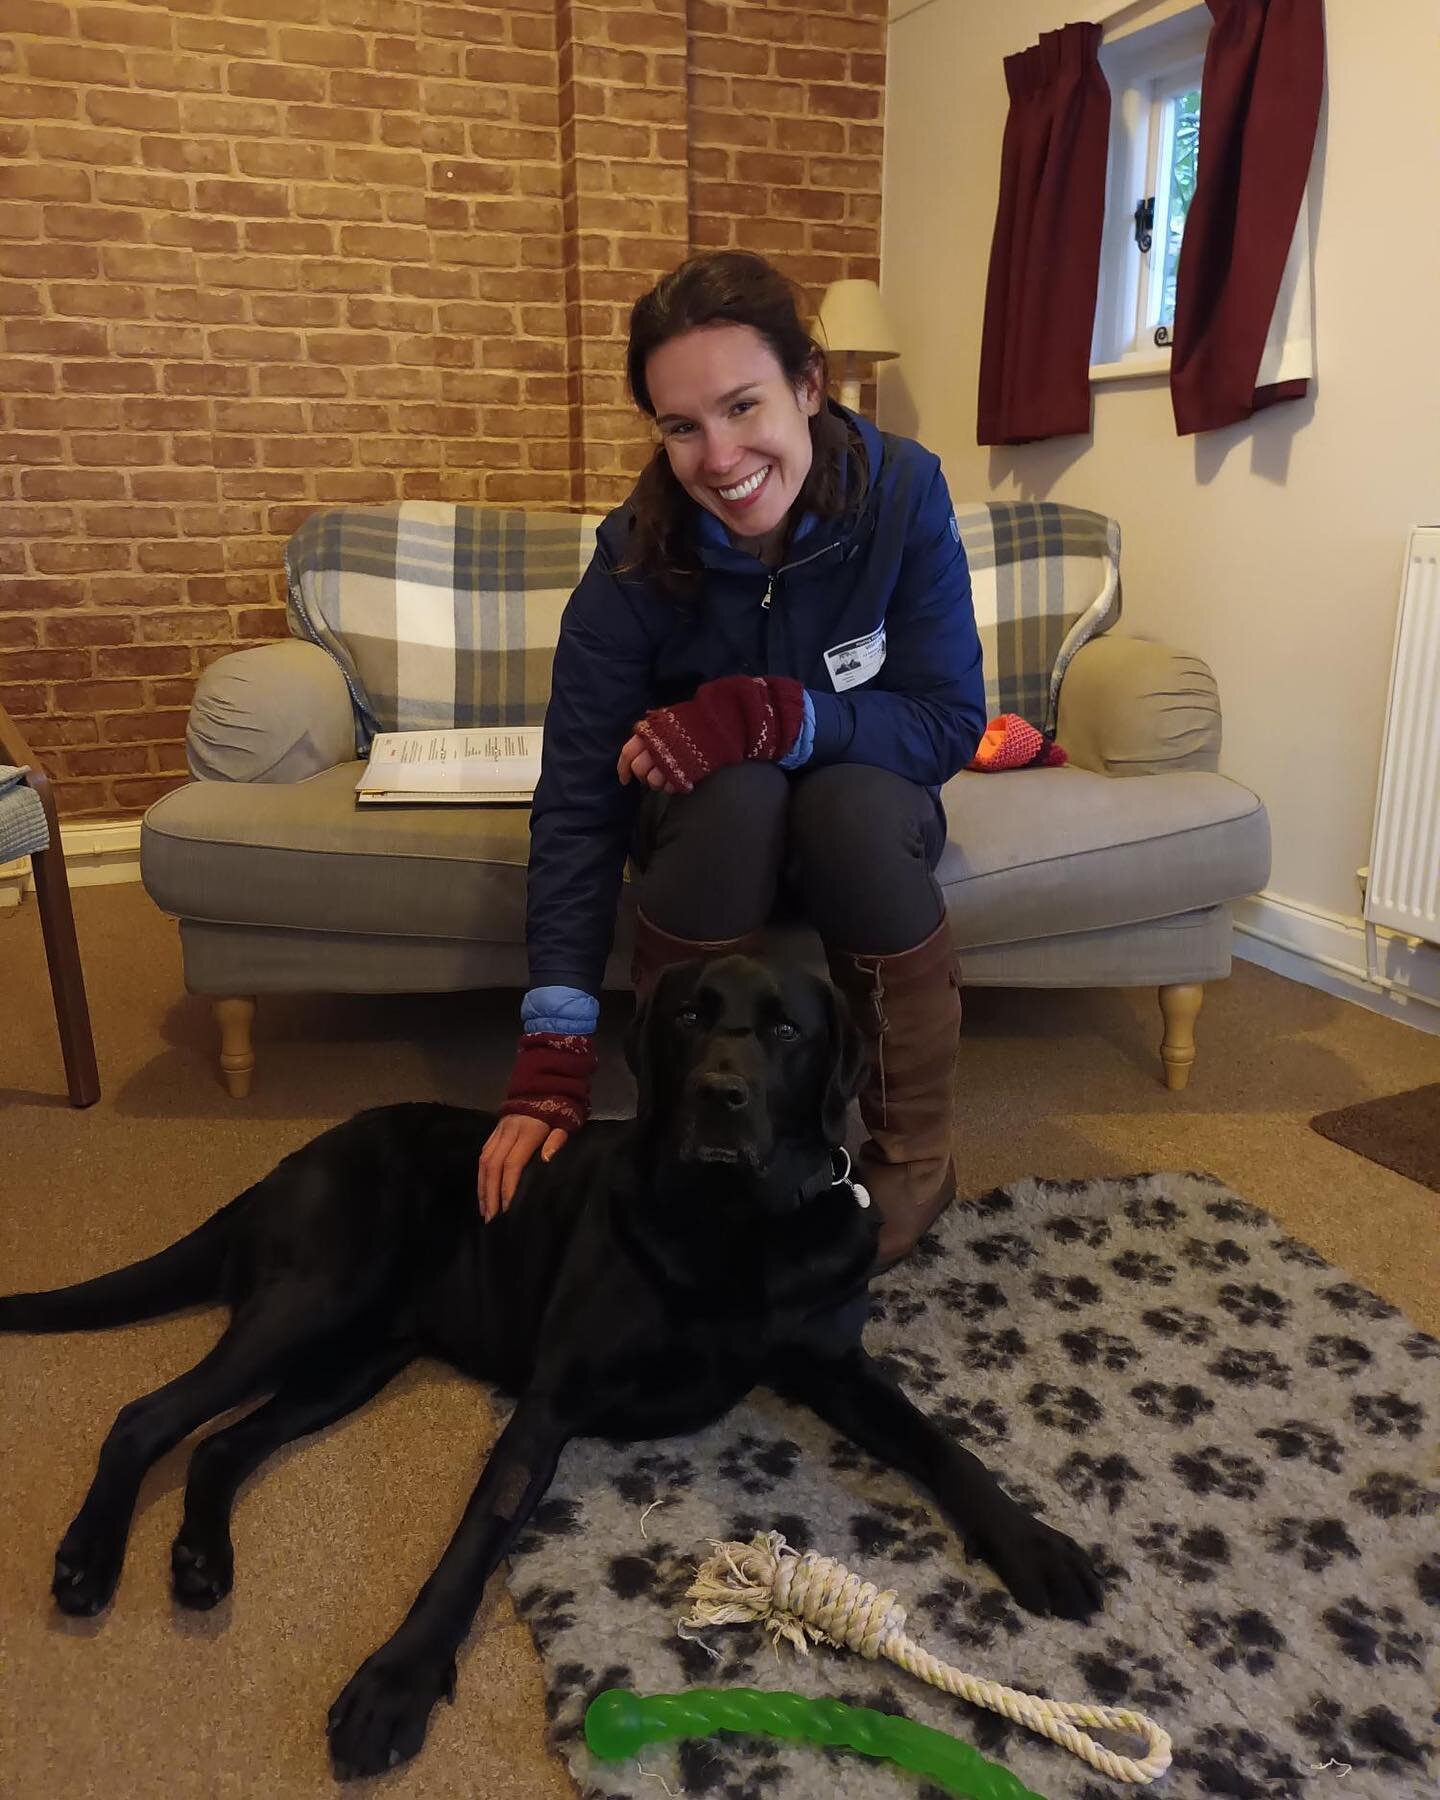 Did you know there are 3 types of hearing dog?

I loved meeting #hearingdogs Forest (Black Lab, pictured with me) and Penny the cream Cocker Spaniel on my visit to the @hearingdogs last week. 

Before my research, I didn&rsquo;t know that there are d